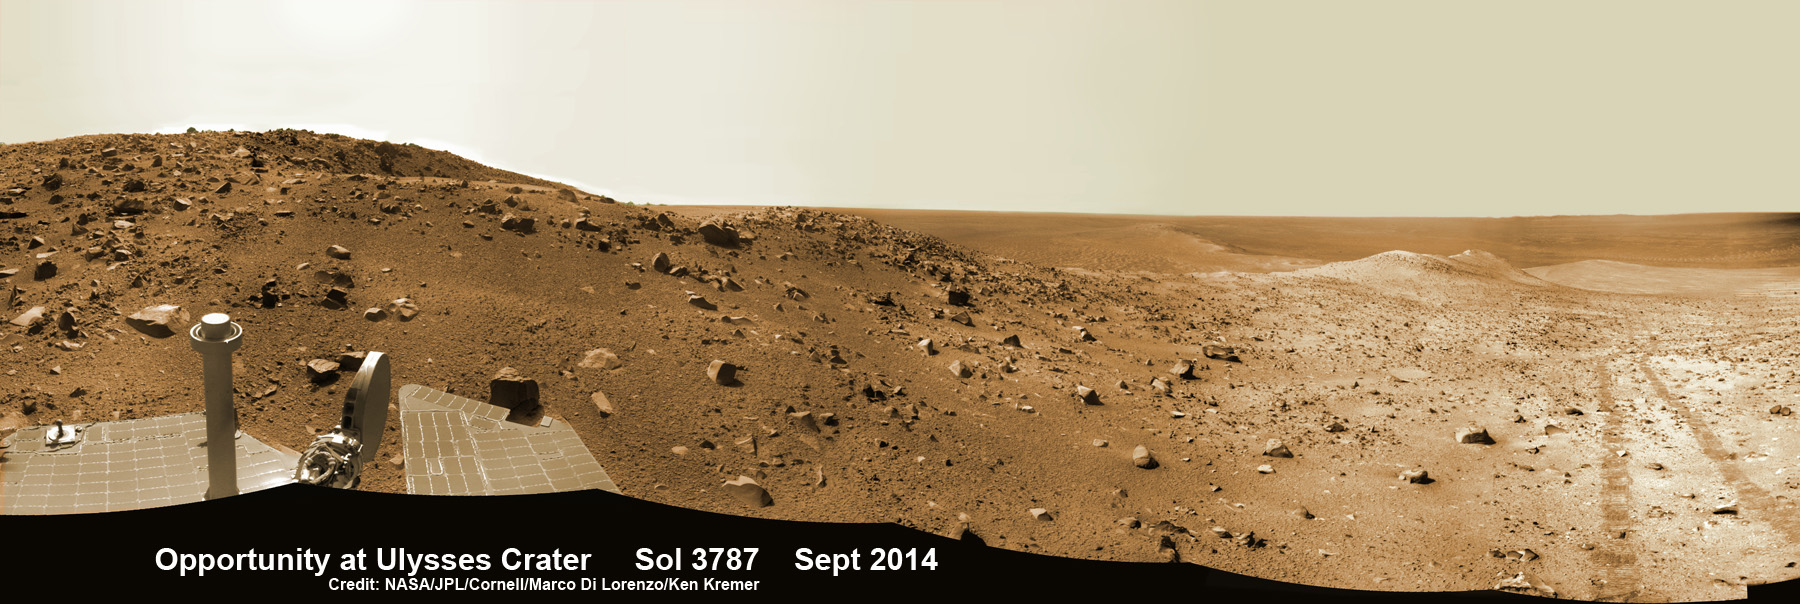 NASA’s Opportunity Mars rover peers out towards Ulysses crater, ejecta rocks and Martian plains beyond  from her crater rim location on Sept. 18, 2014.  This navcam camera photo mosaic was assembled from images taken on Sol 3787, Sept. 18, 2014 and colorized.  Credit: NASA/JPL/Cornell/Marco Di Lorenzo/Ken Kremer - kenkremer.com